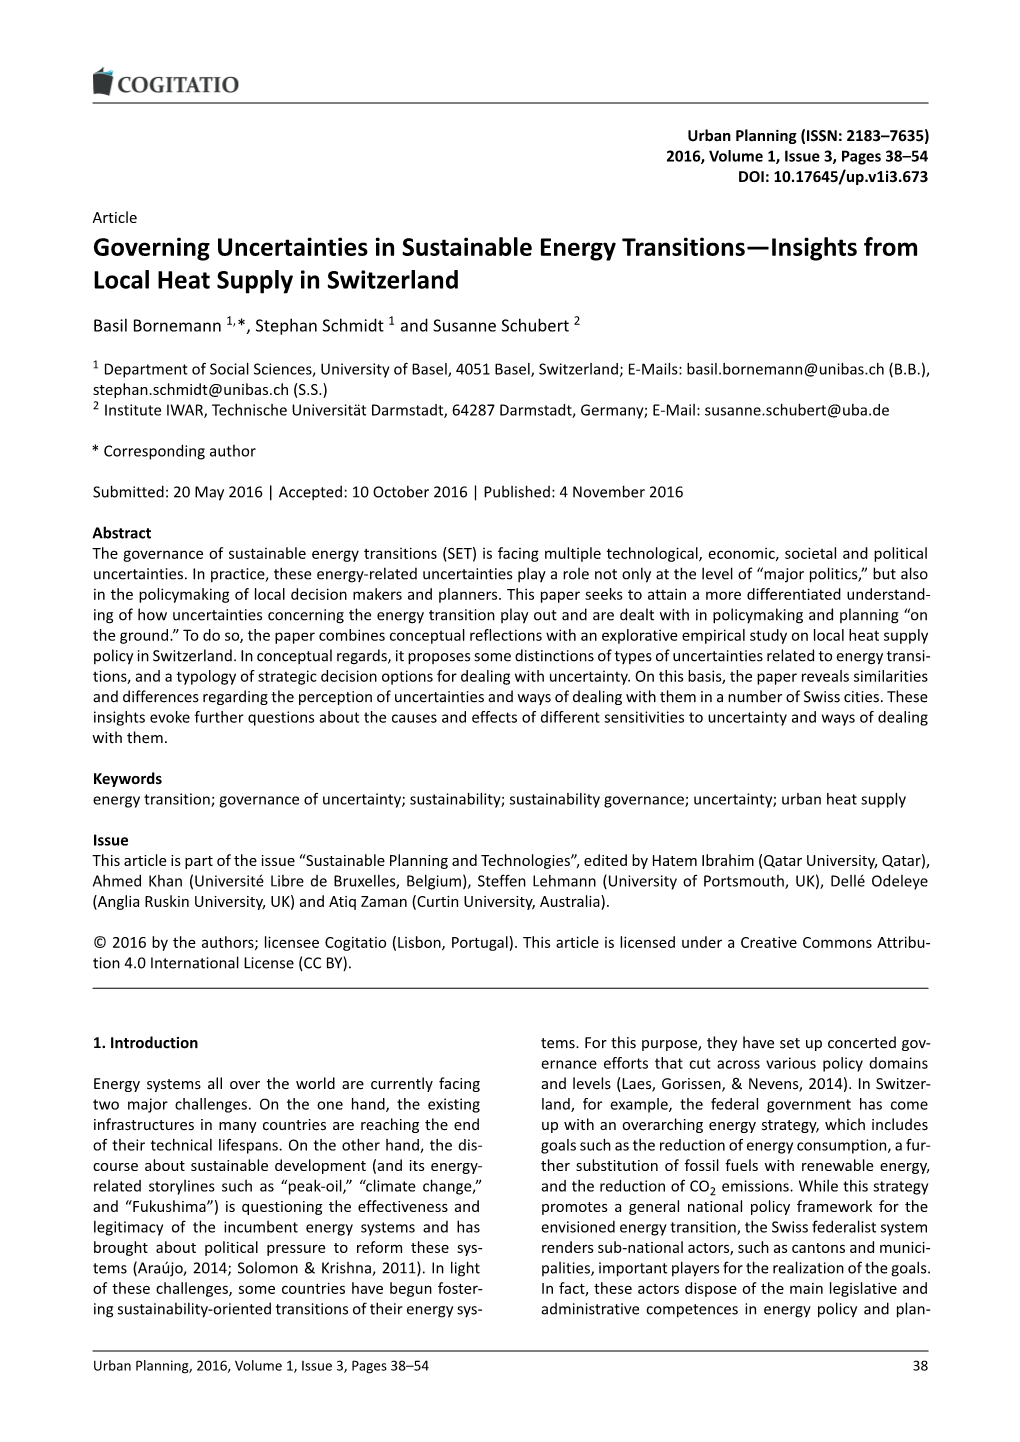 Governing Uncertainties in Sustainable Energy Transitions—Insights from Local Heat Supply in Switzerland